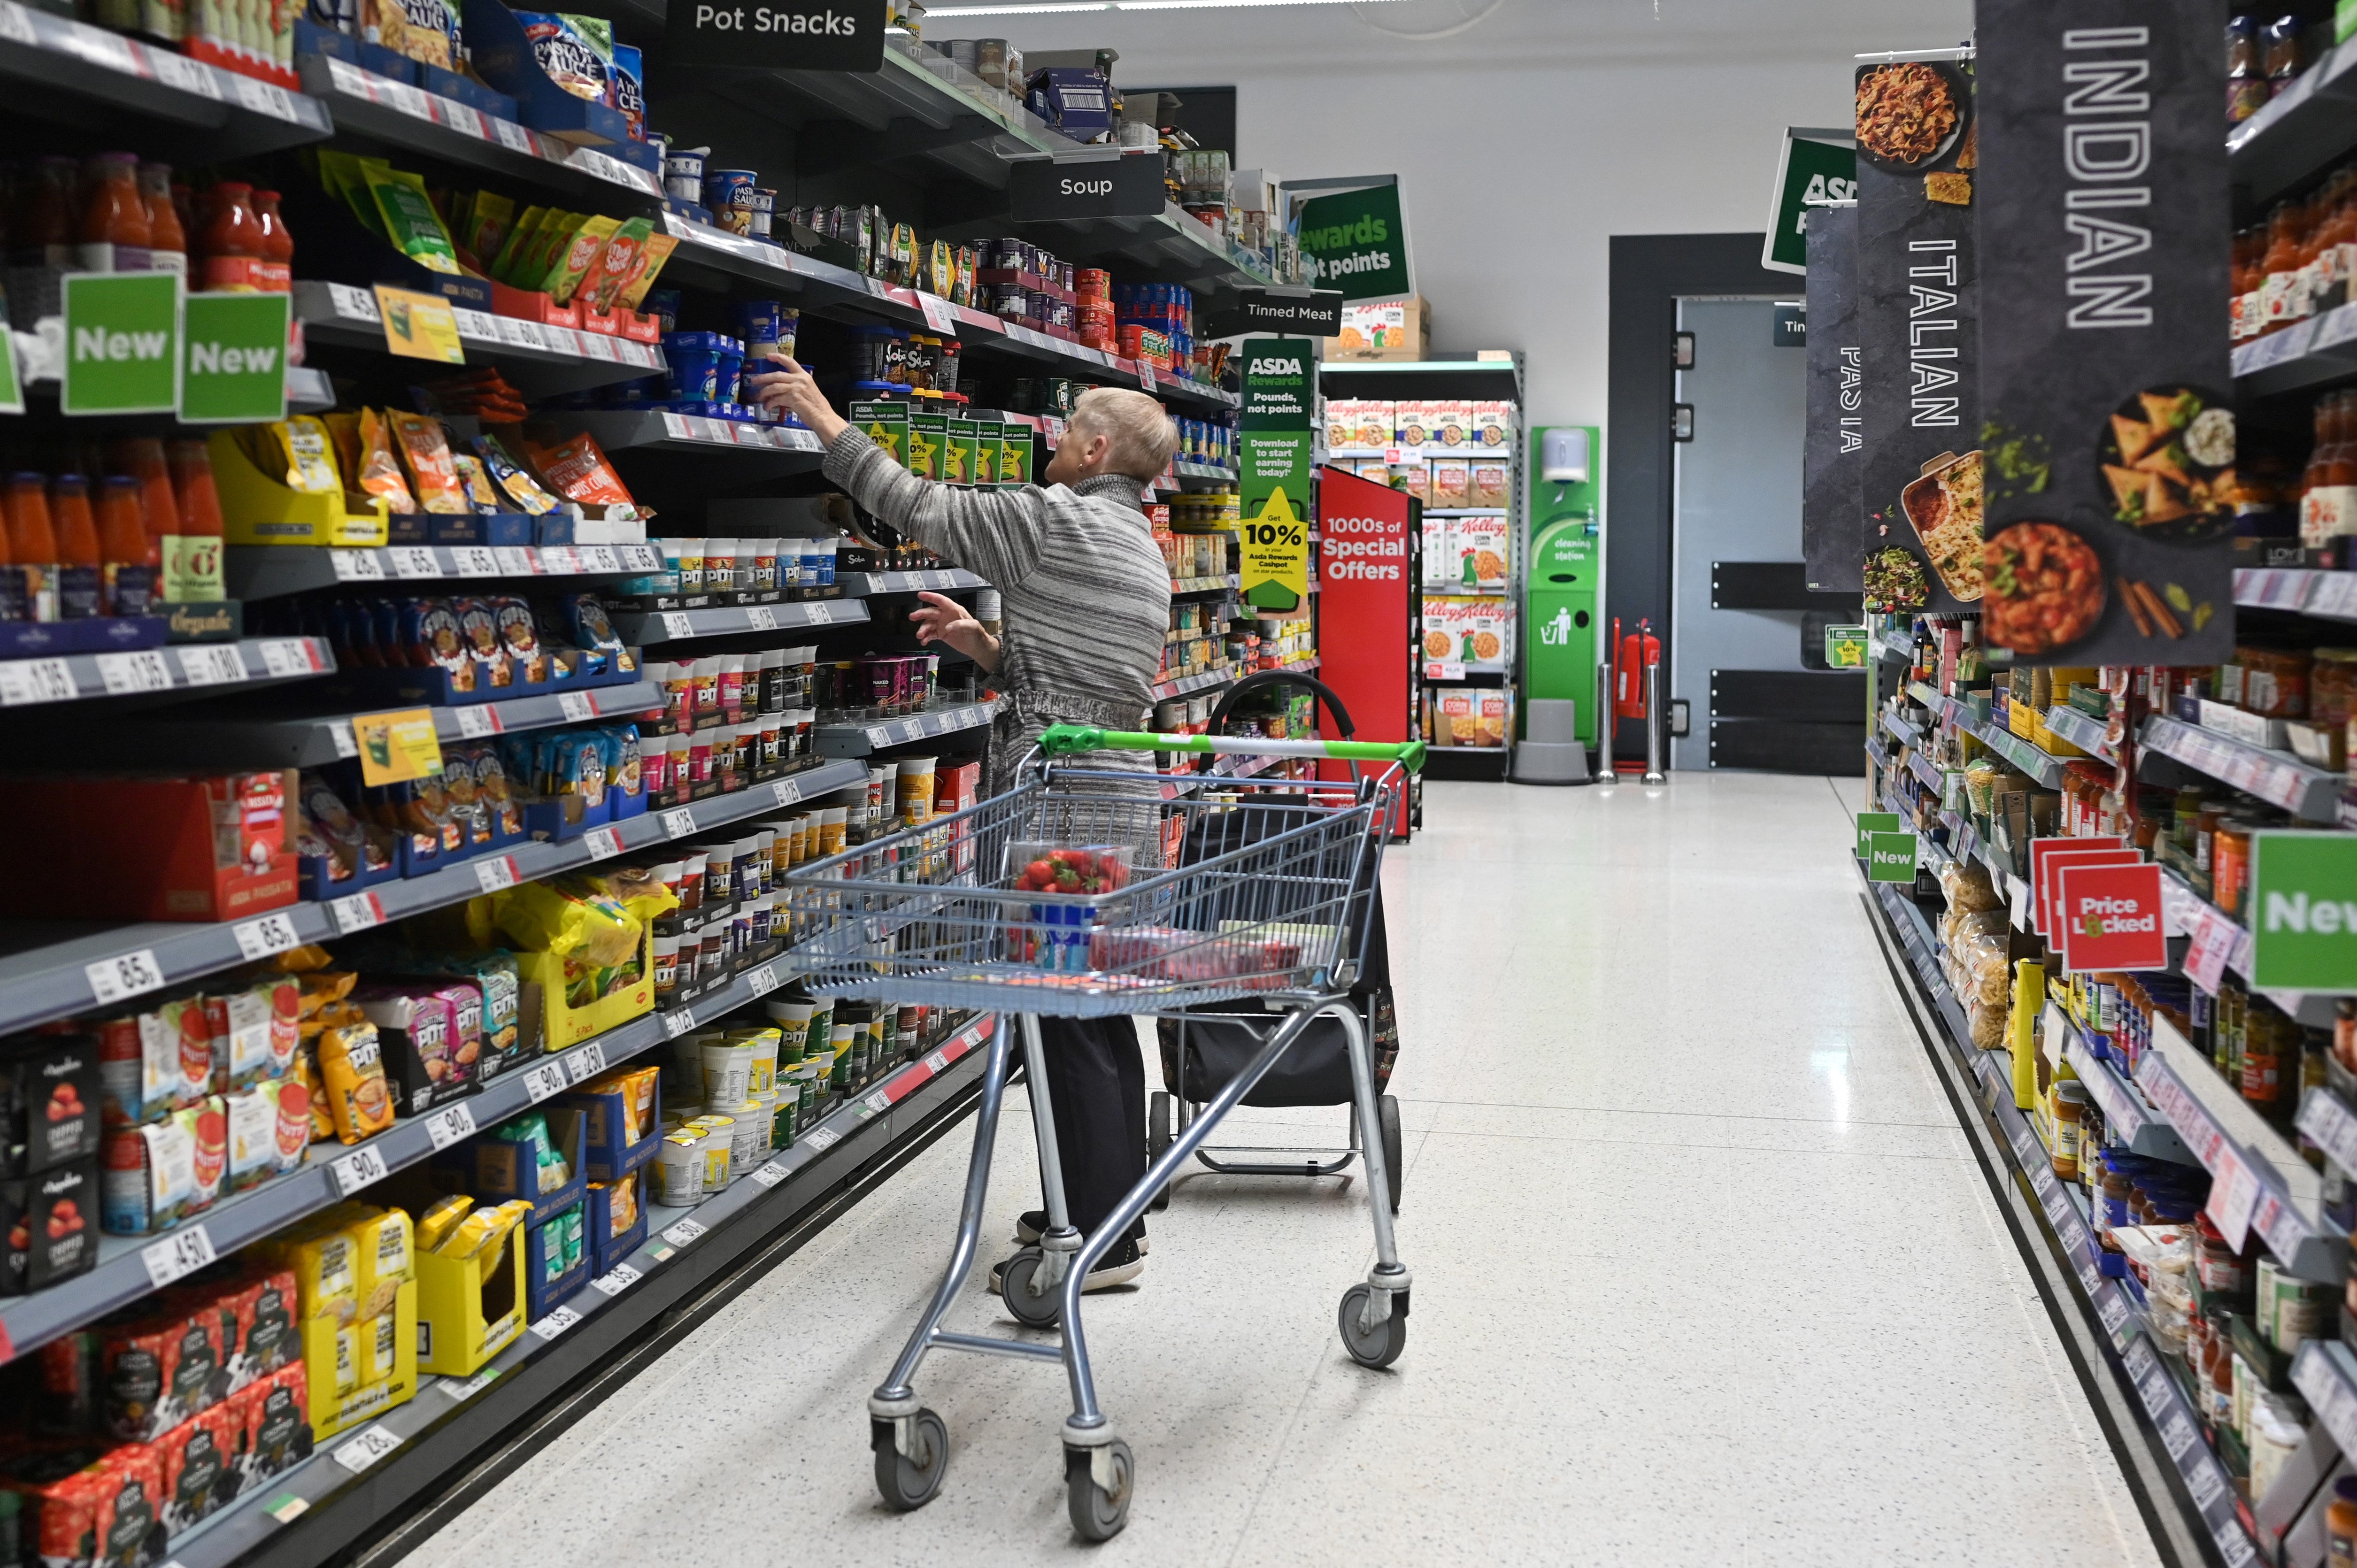 Another Brexit aftershock will be felt in the supermarket aisles